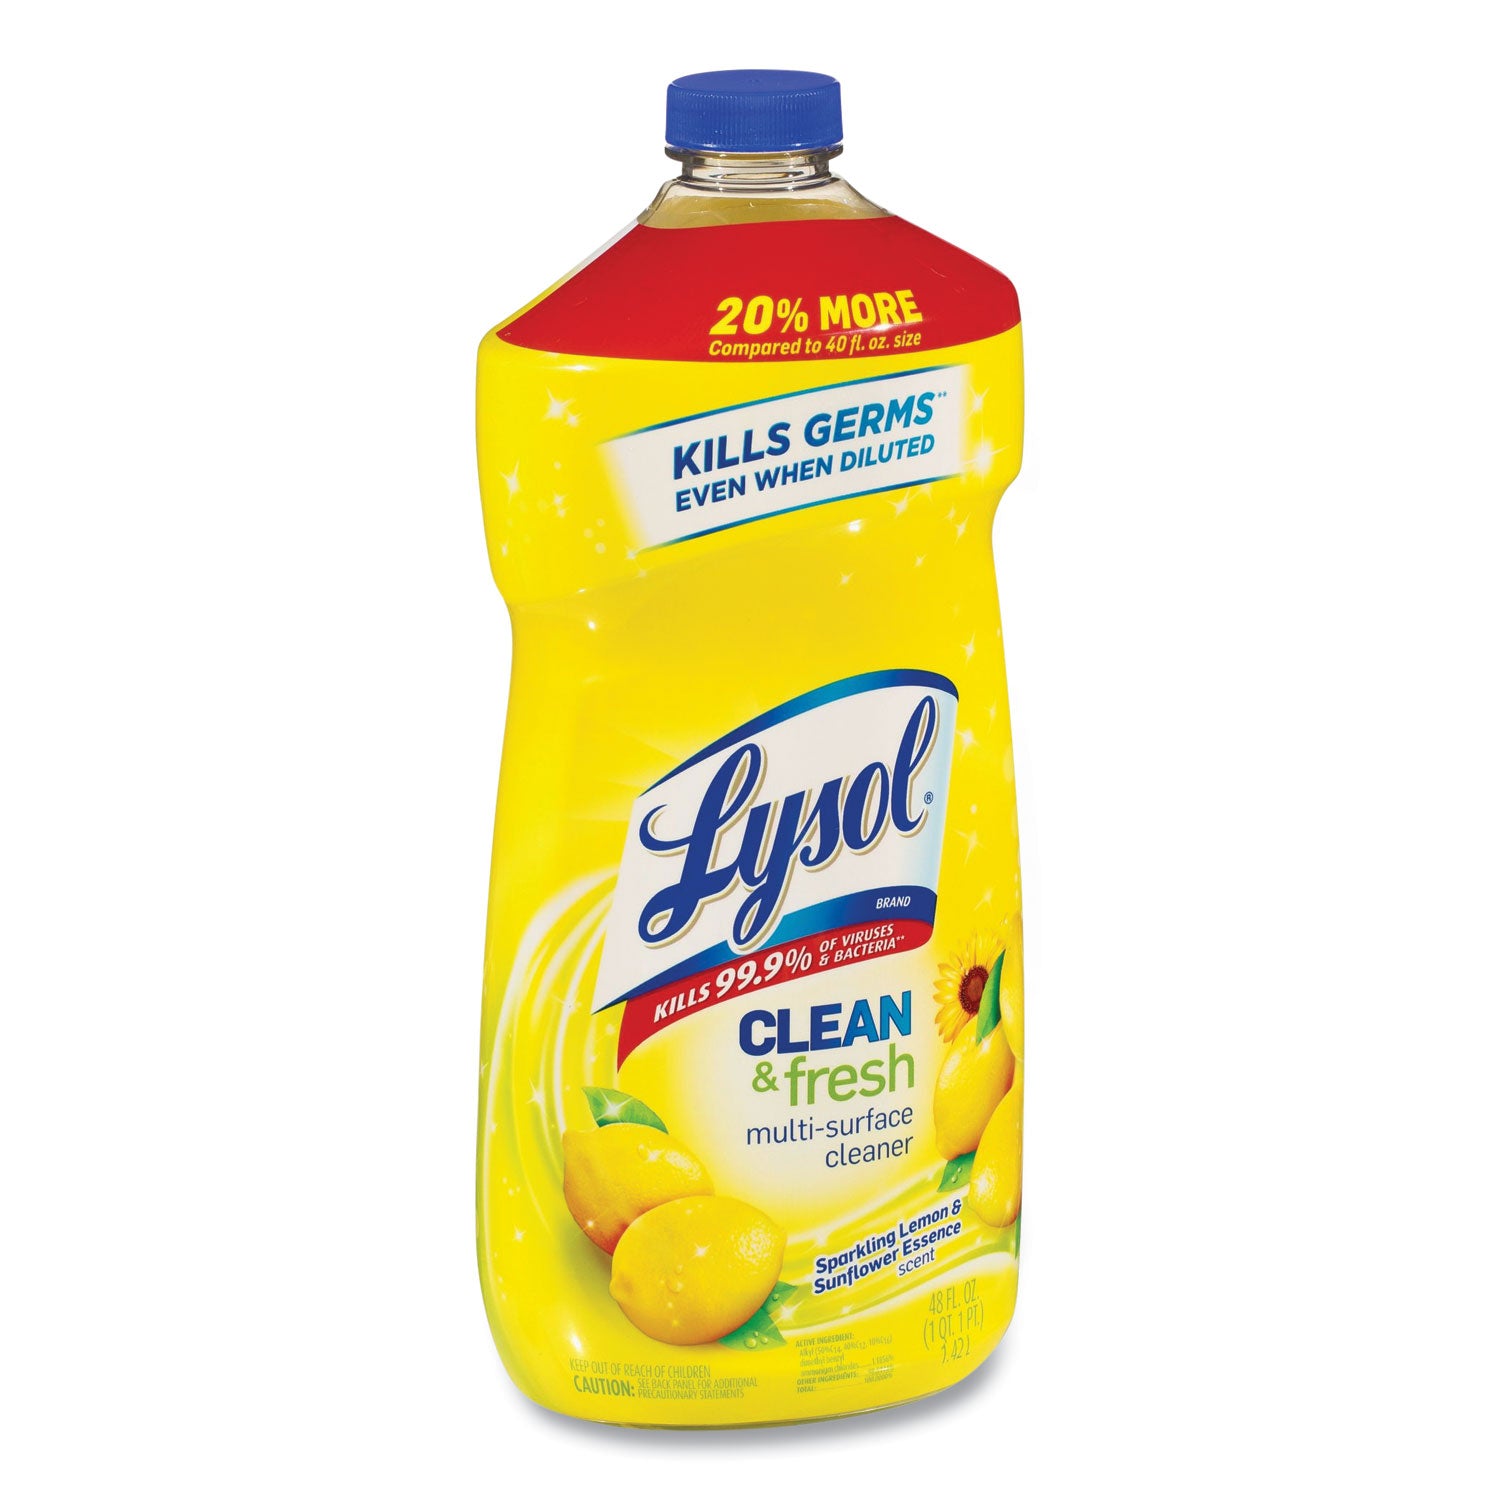 clean-and-fresh-multi-surface-cleaner-sparkling-lemon-and-sunflower-essence-48-oz-bottle-9-carton_rac89962ct - 2